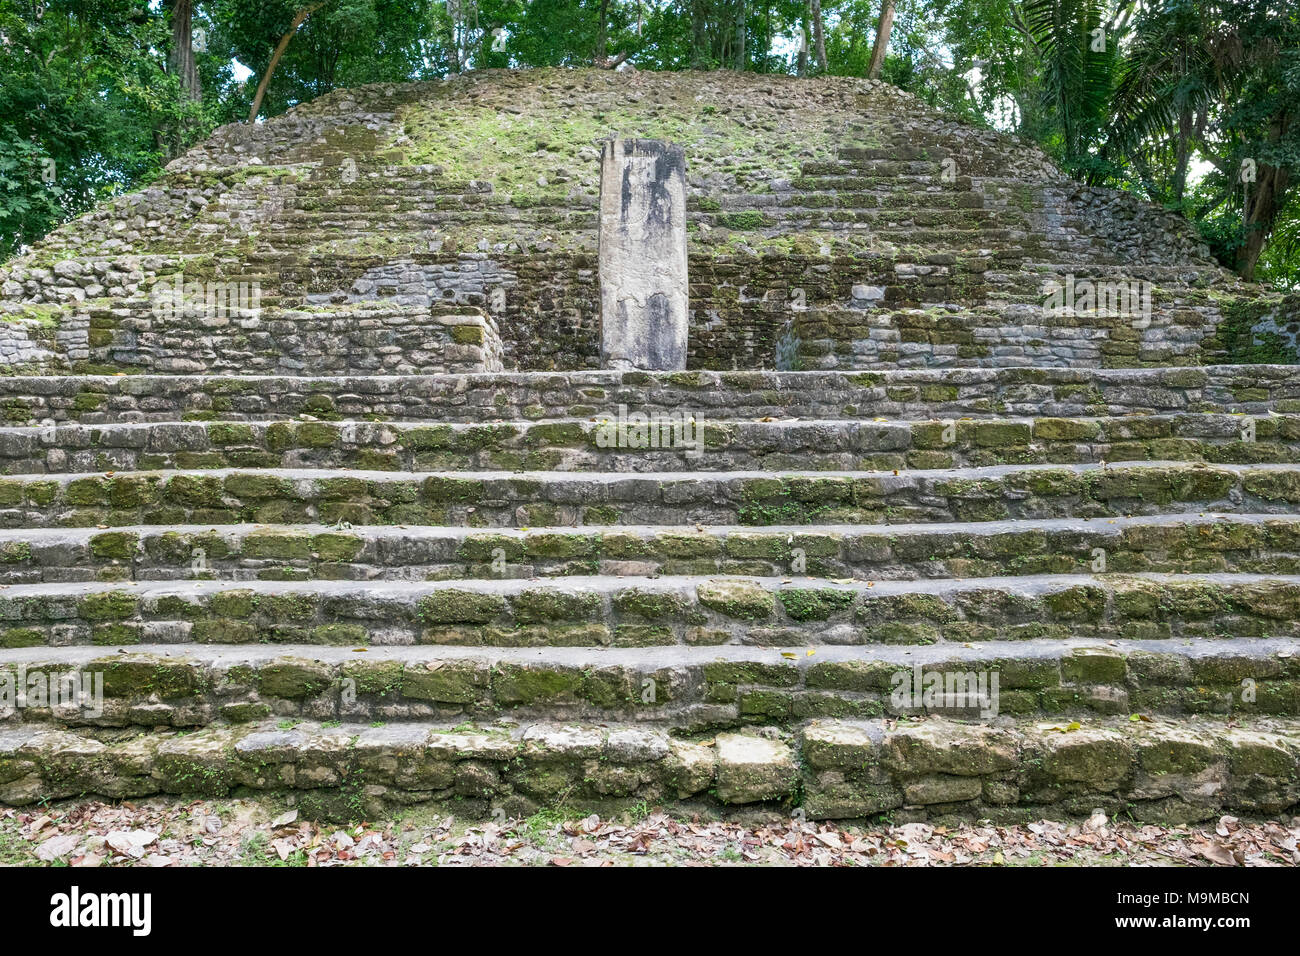 Ancient Mayan ruins and temples in the archeological site of Lamanai, Belize, Central America Stock Photo